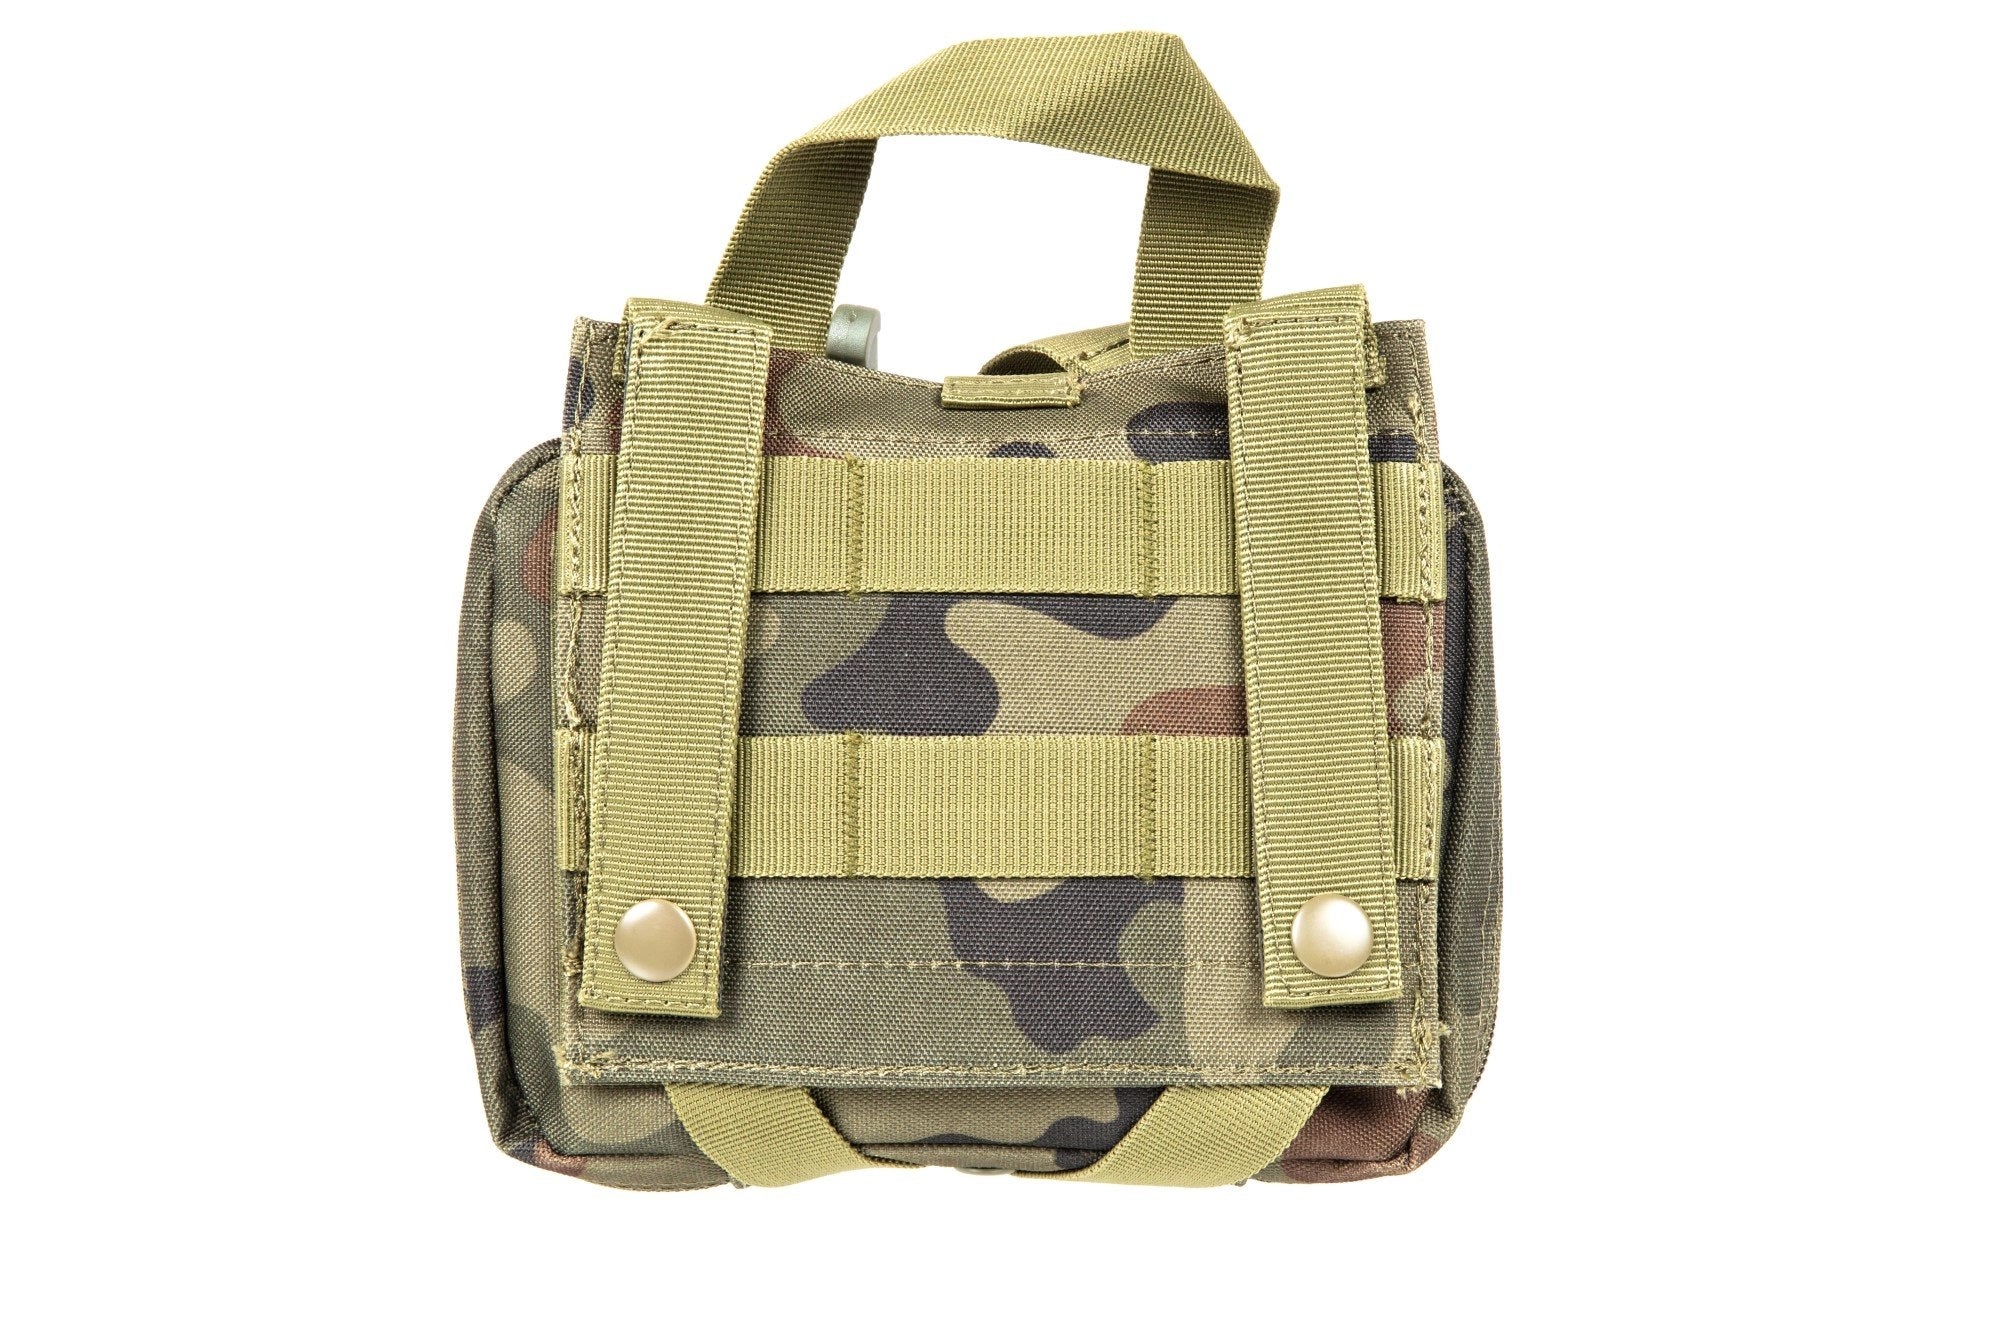 rip-off med pouch - wz.93 woodland panther